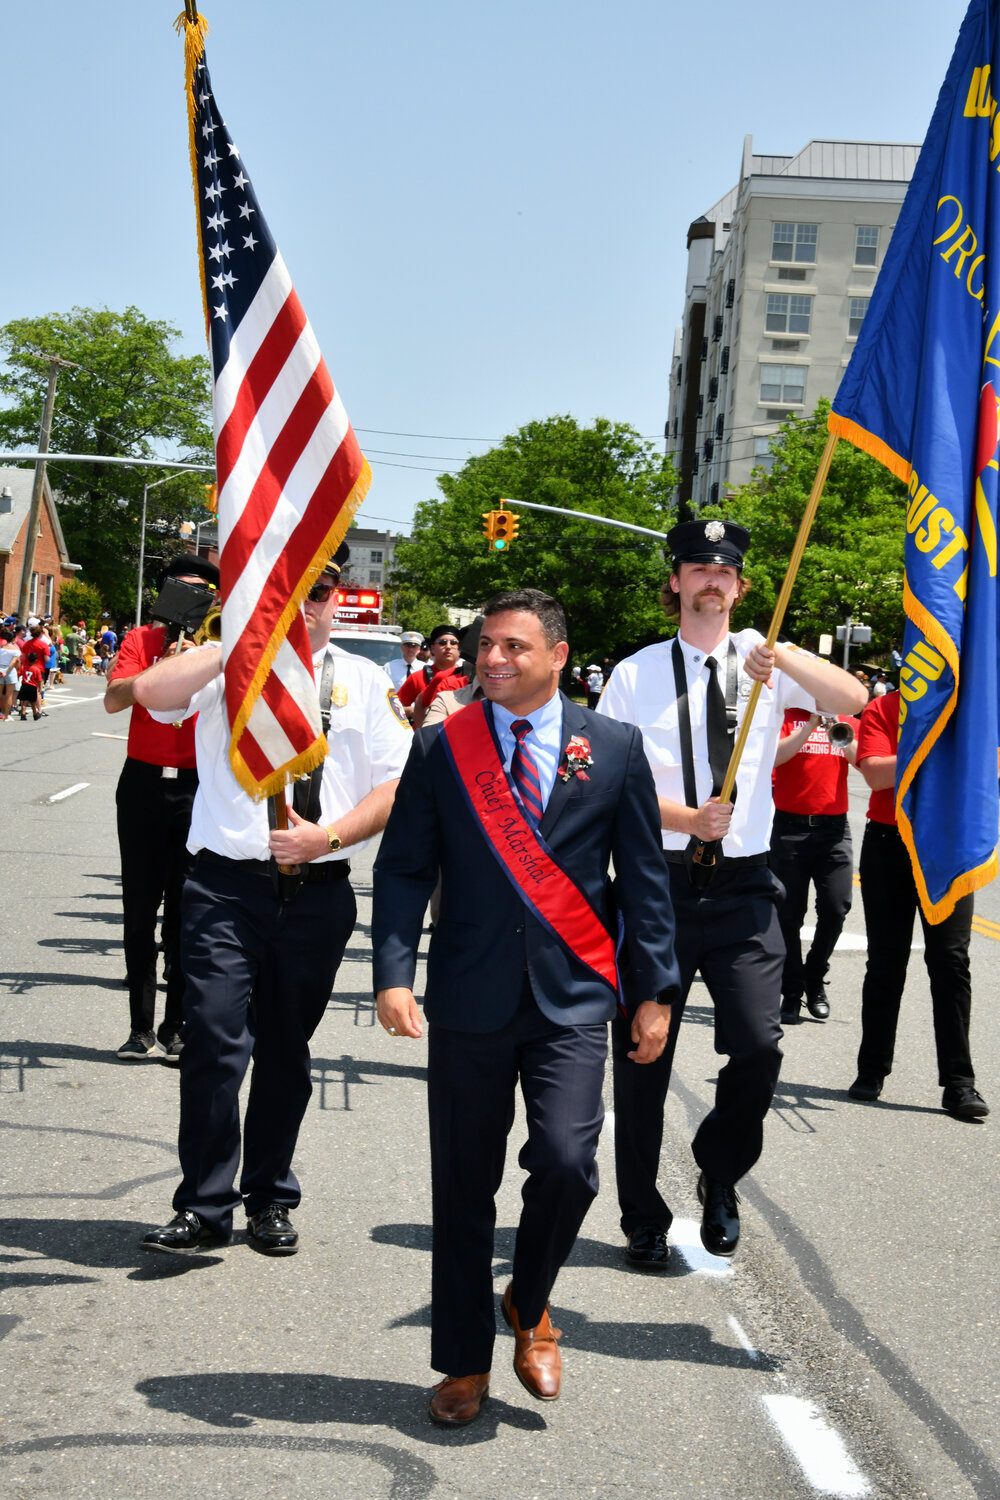 One of the parade’s grand marshal’s, Mike Mienko, right, marched in solidarity with the Fire Department.